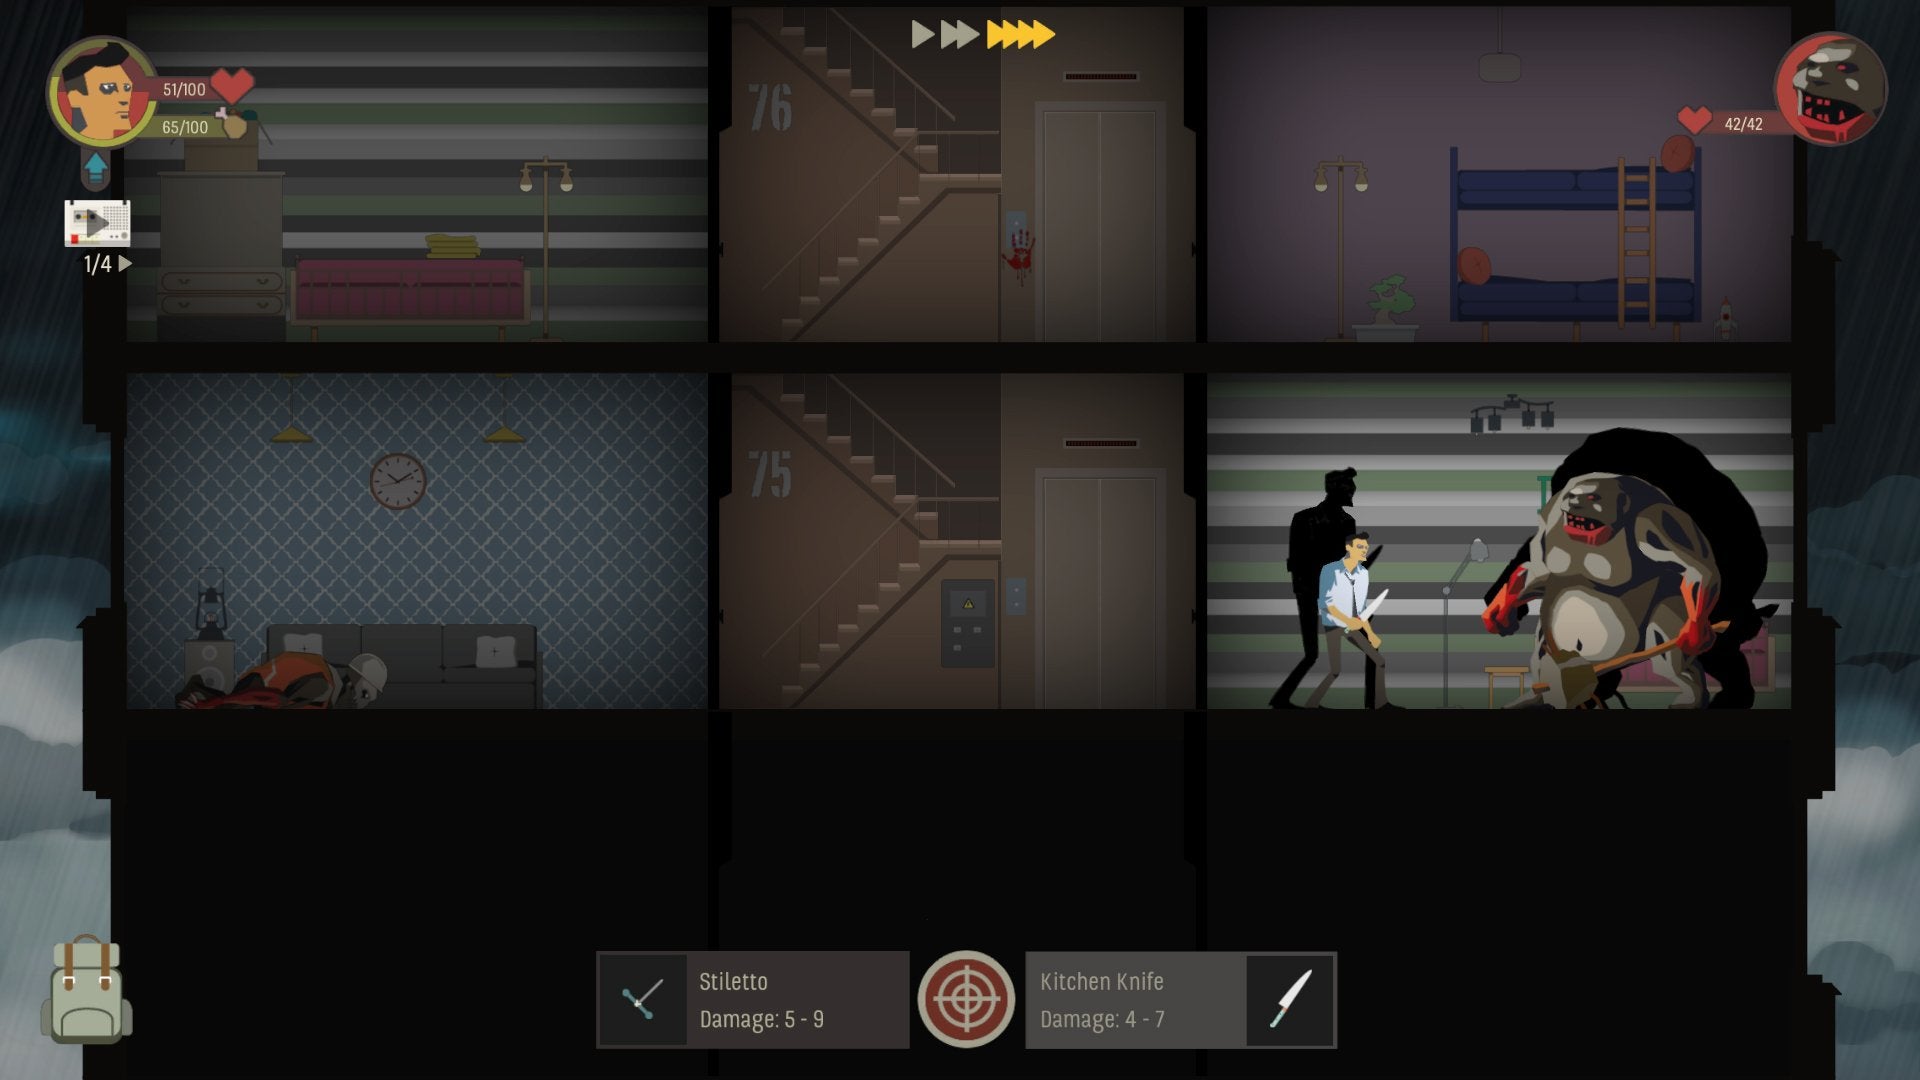 The player in SKYHILL (a Roguelike) fighting a large zombie wielding a hammer in an apartment building.